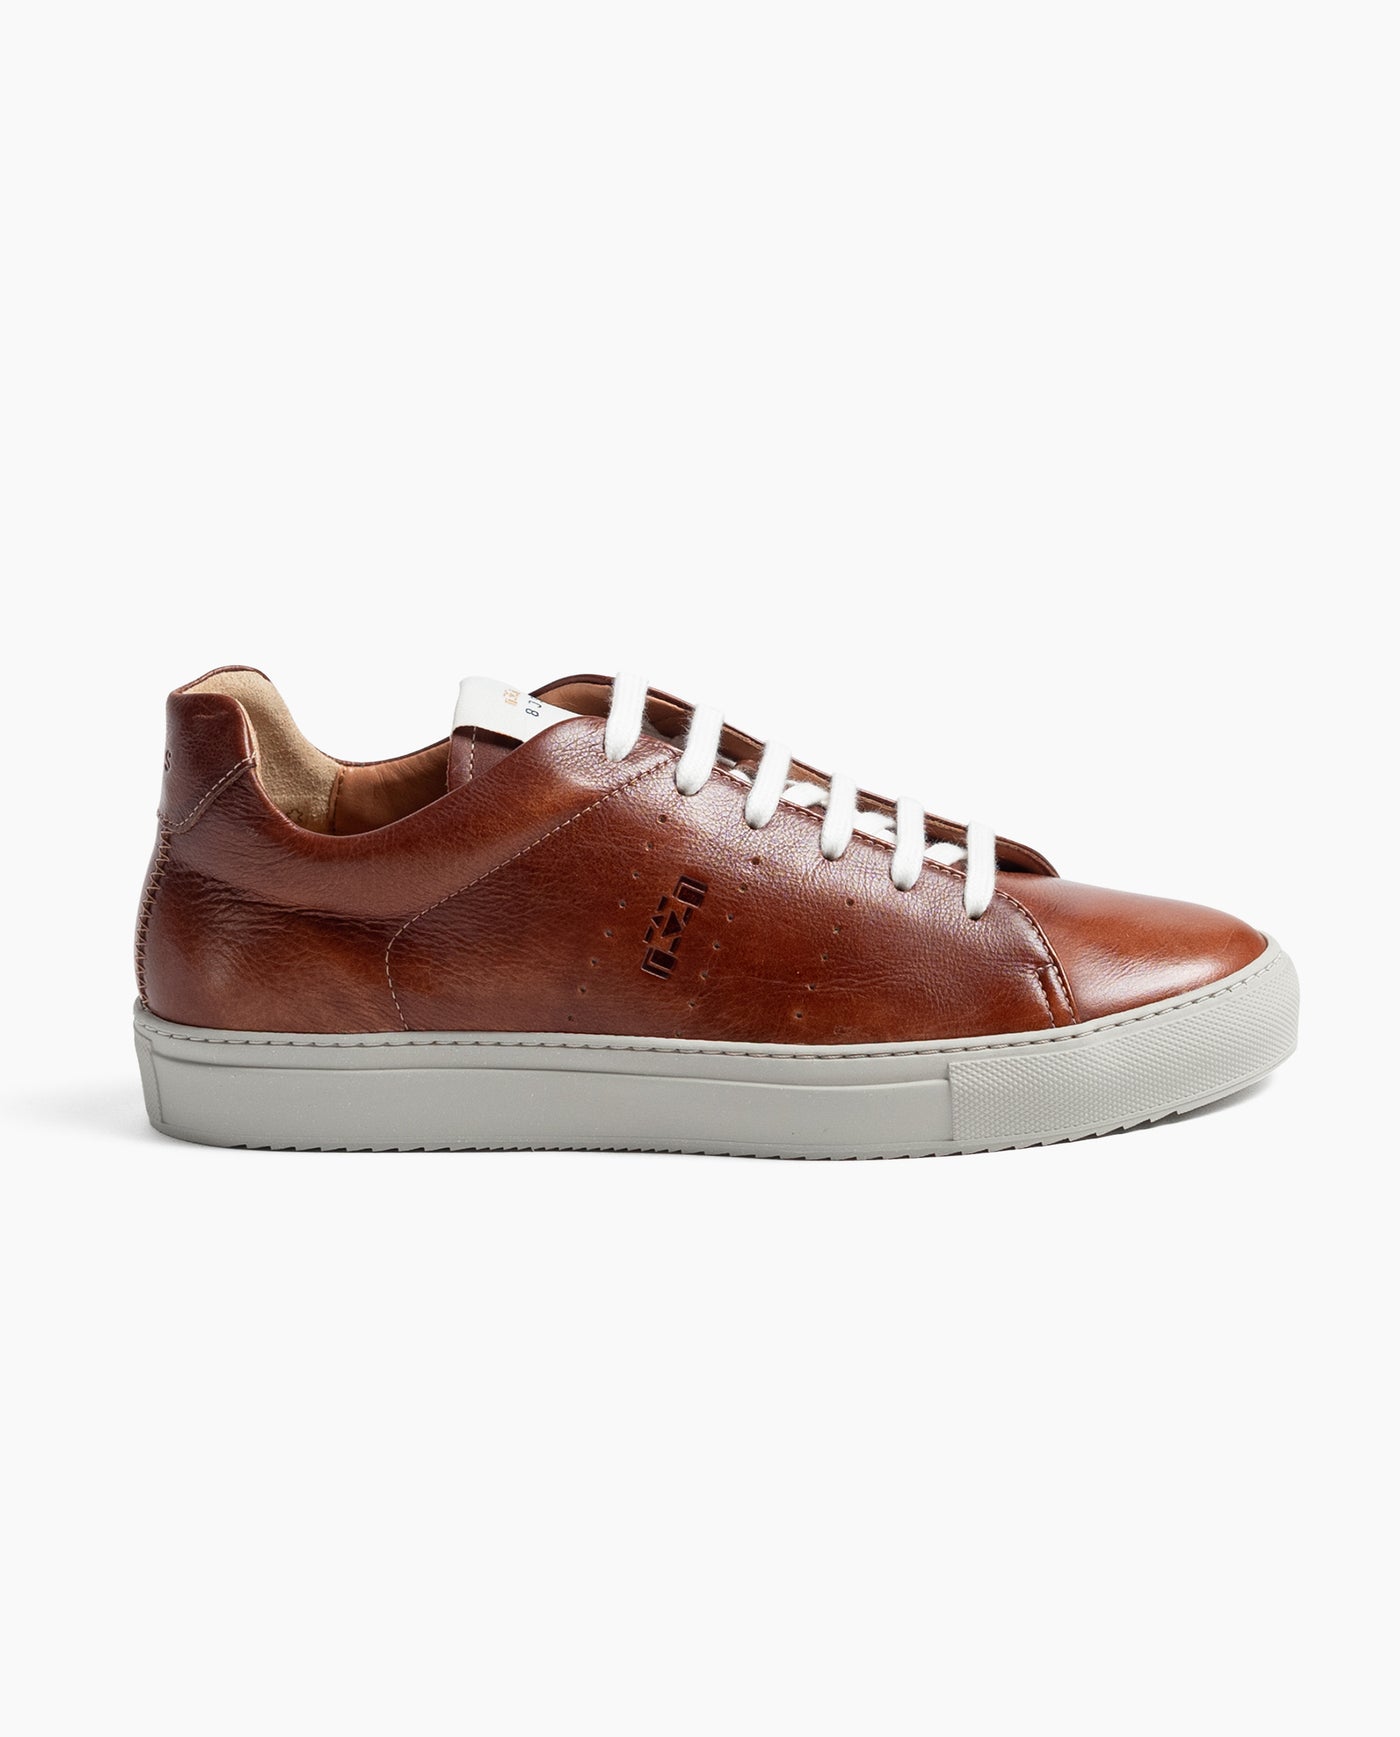 Leather Racing Sneakers / Burnished Brown - 8JS